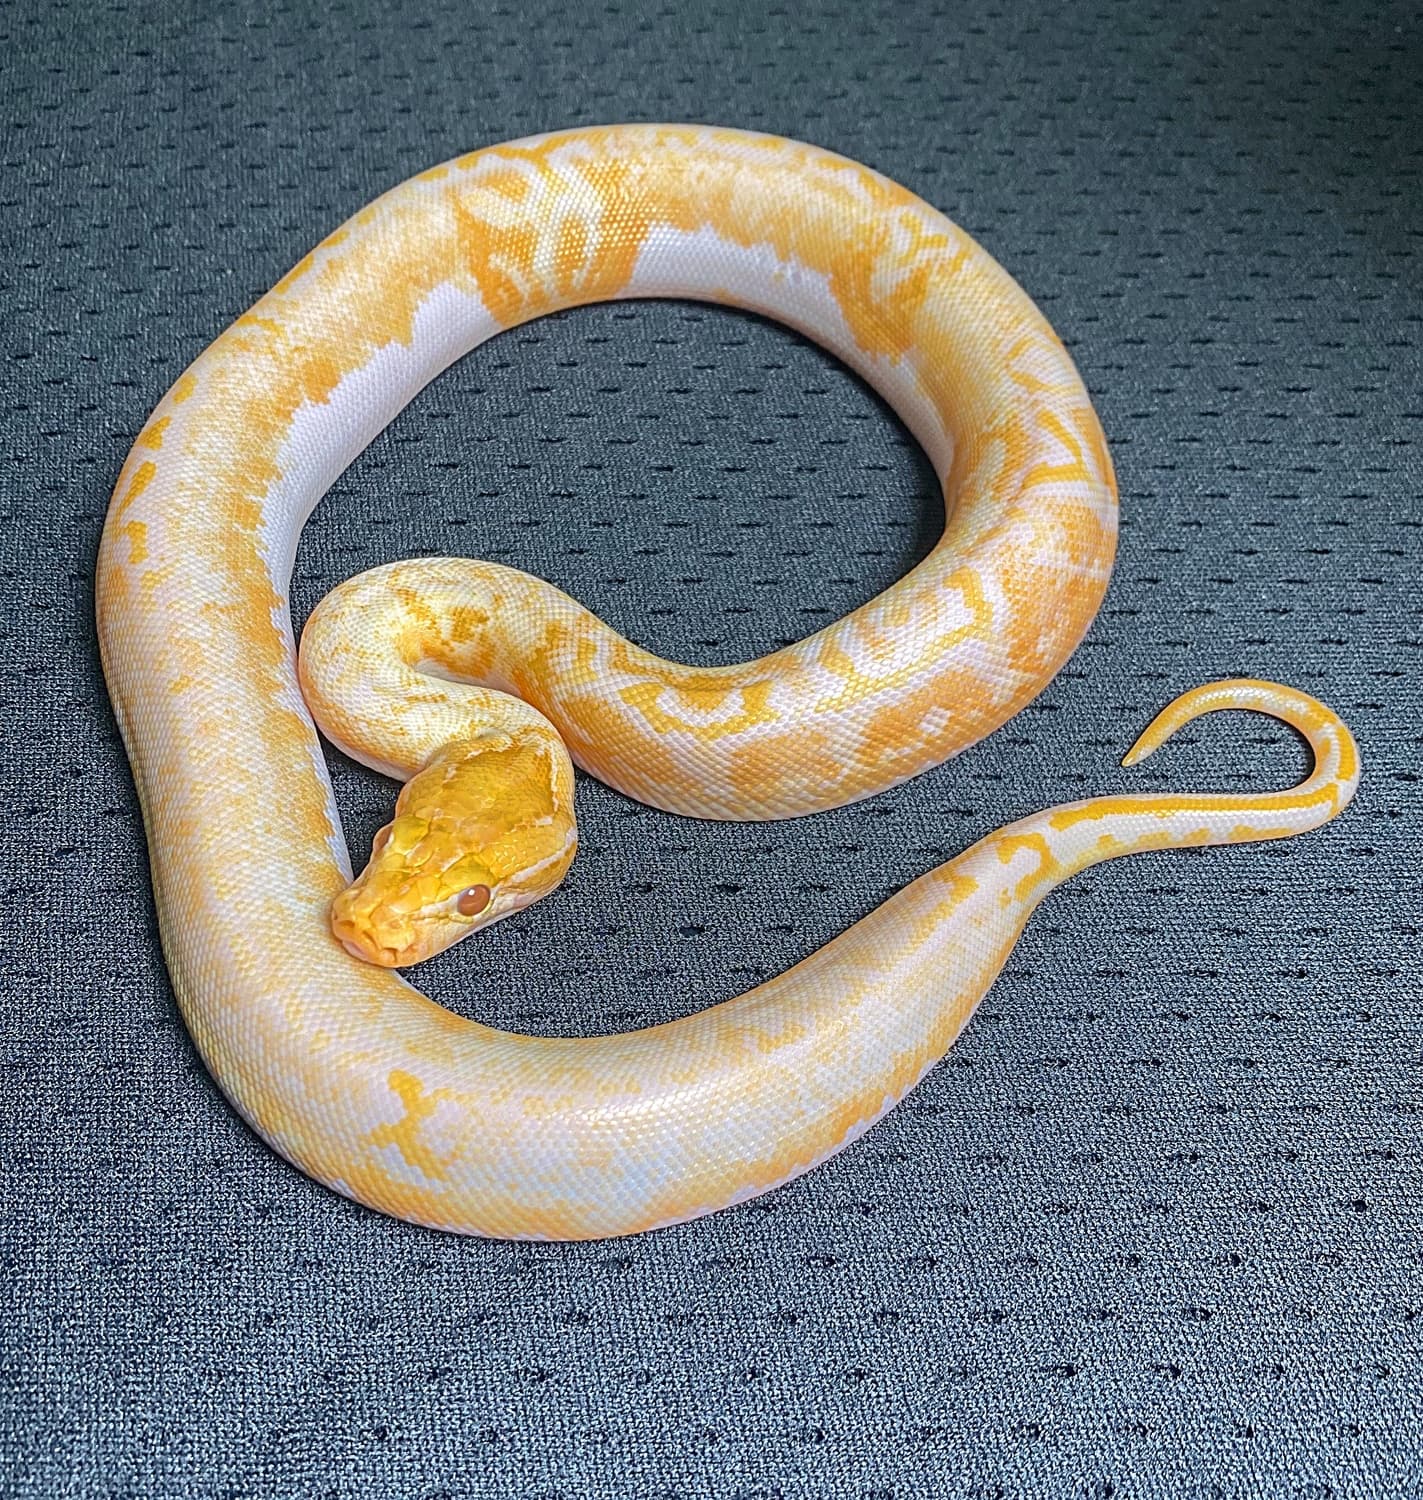 Albino Pied Burmese Python by Serpents By Design LLC